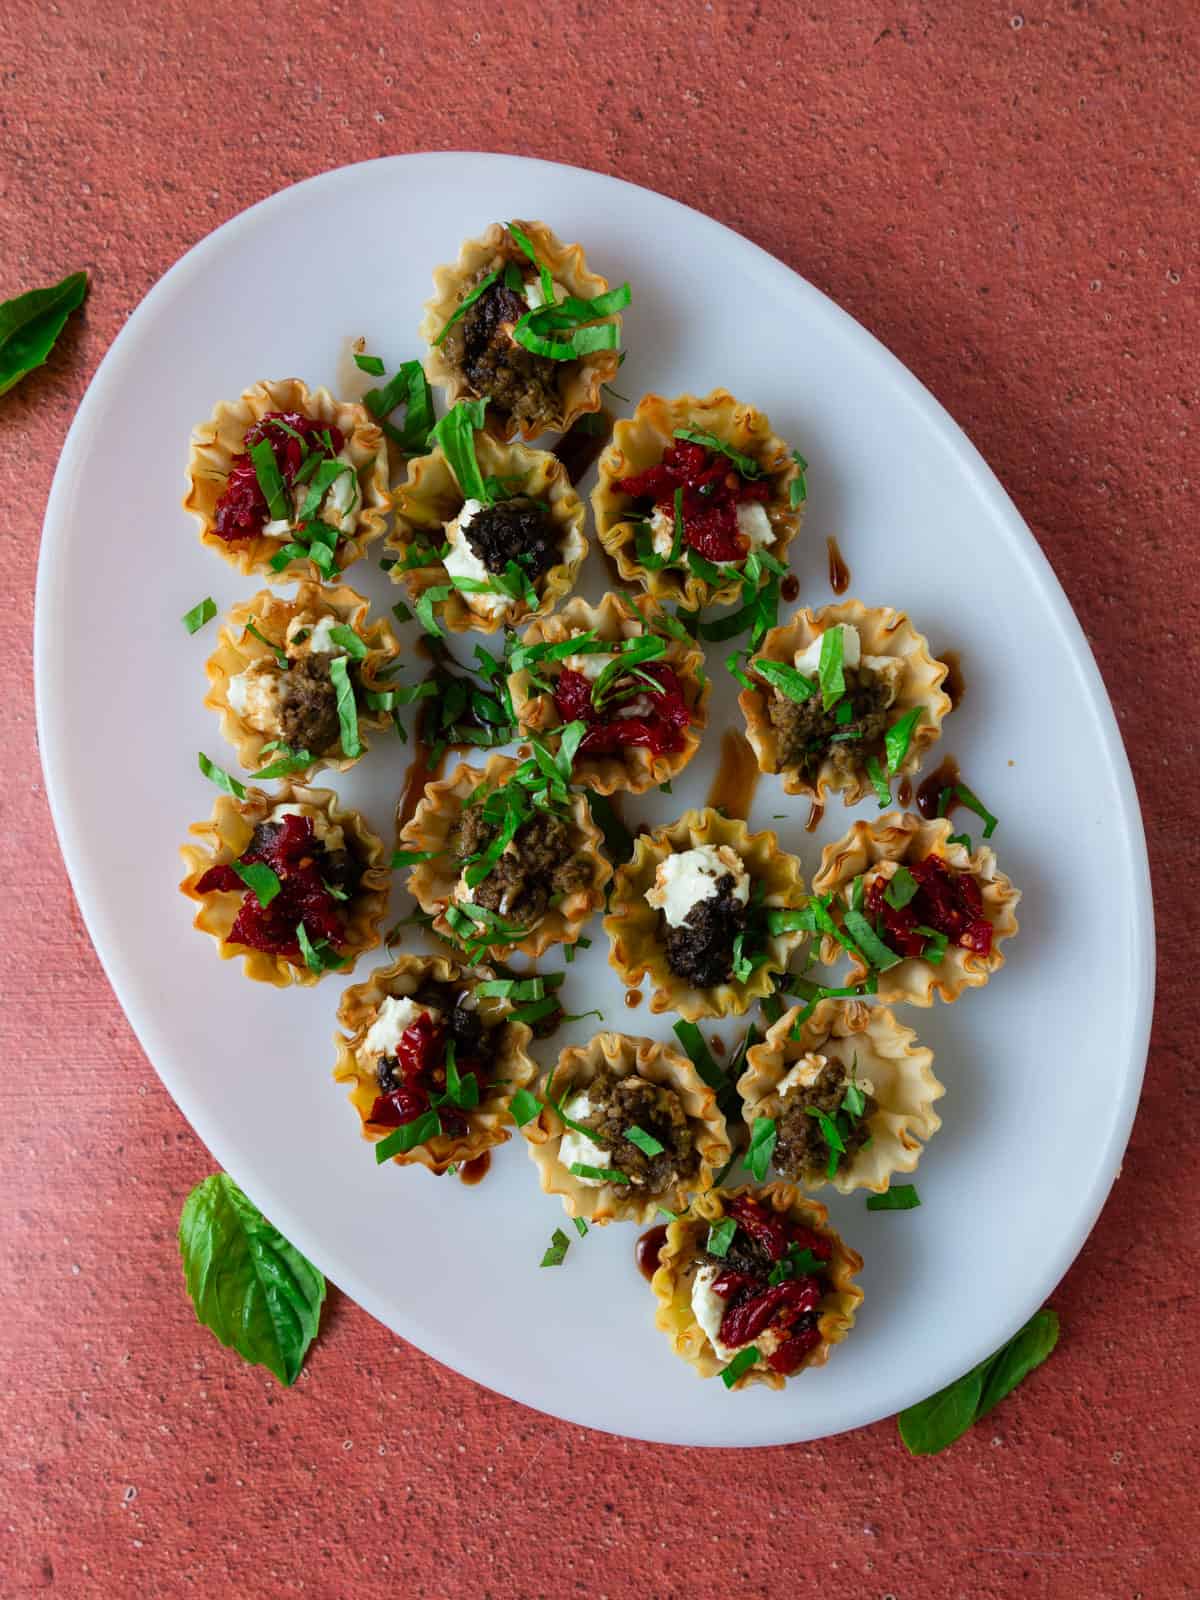 Goat cheese stuffed phyllo cups with pesto, tapenade and sun-dried tomatoes. Garnish with balsamic and basil.